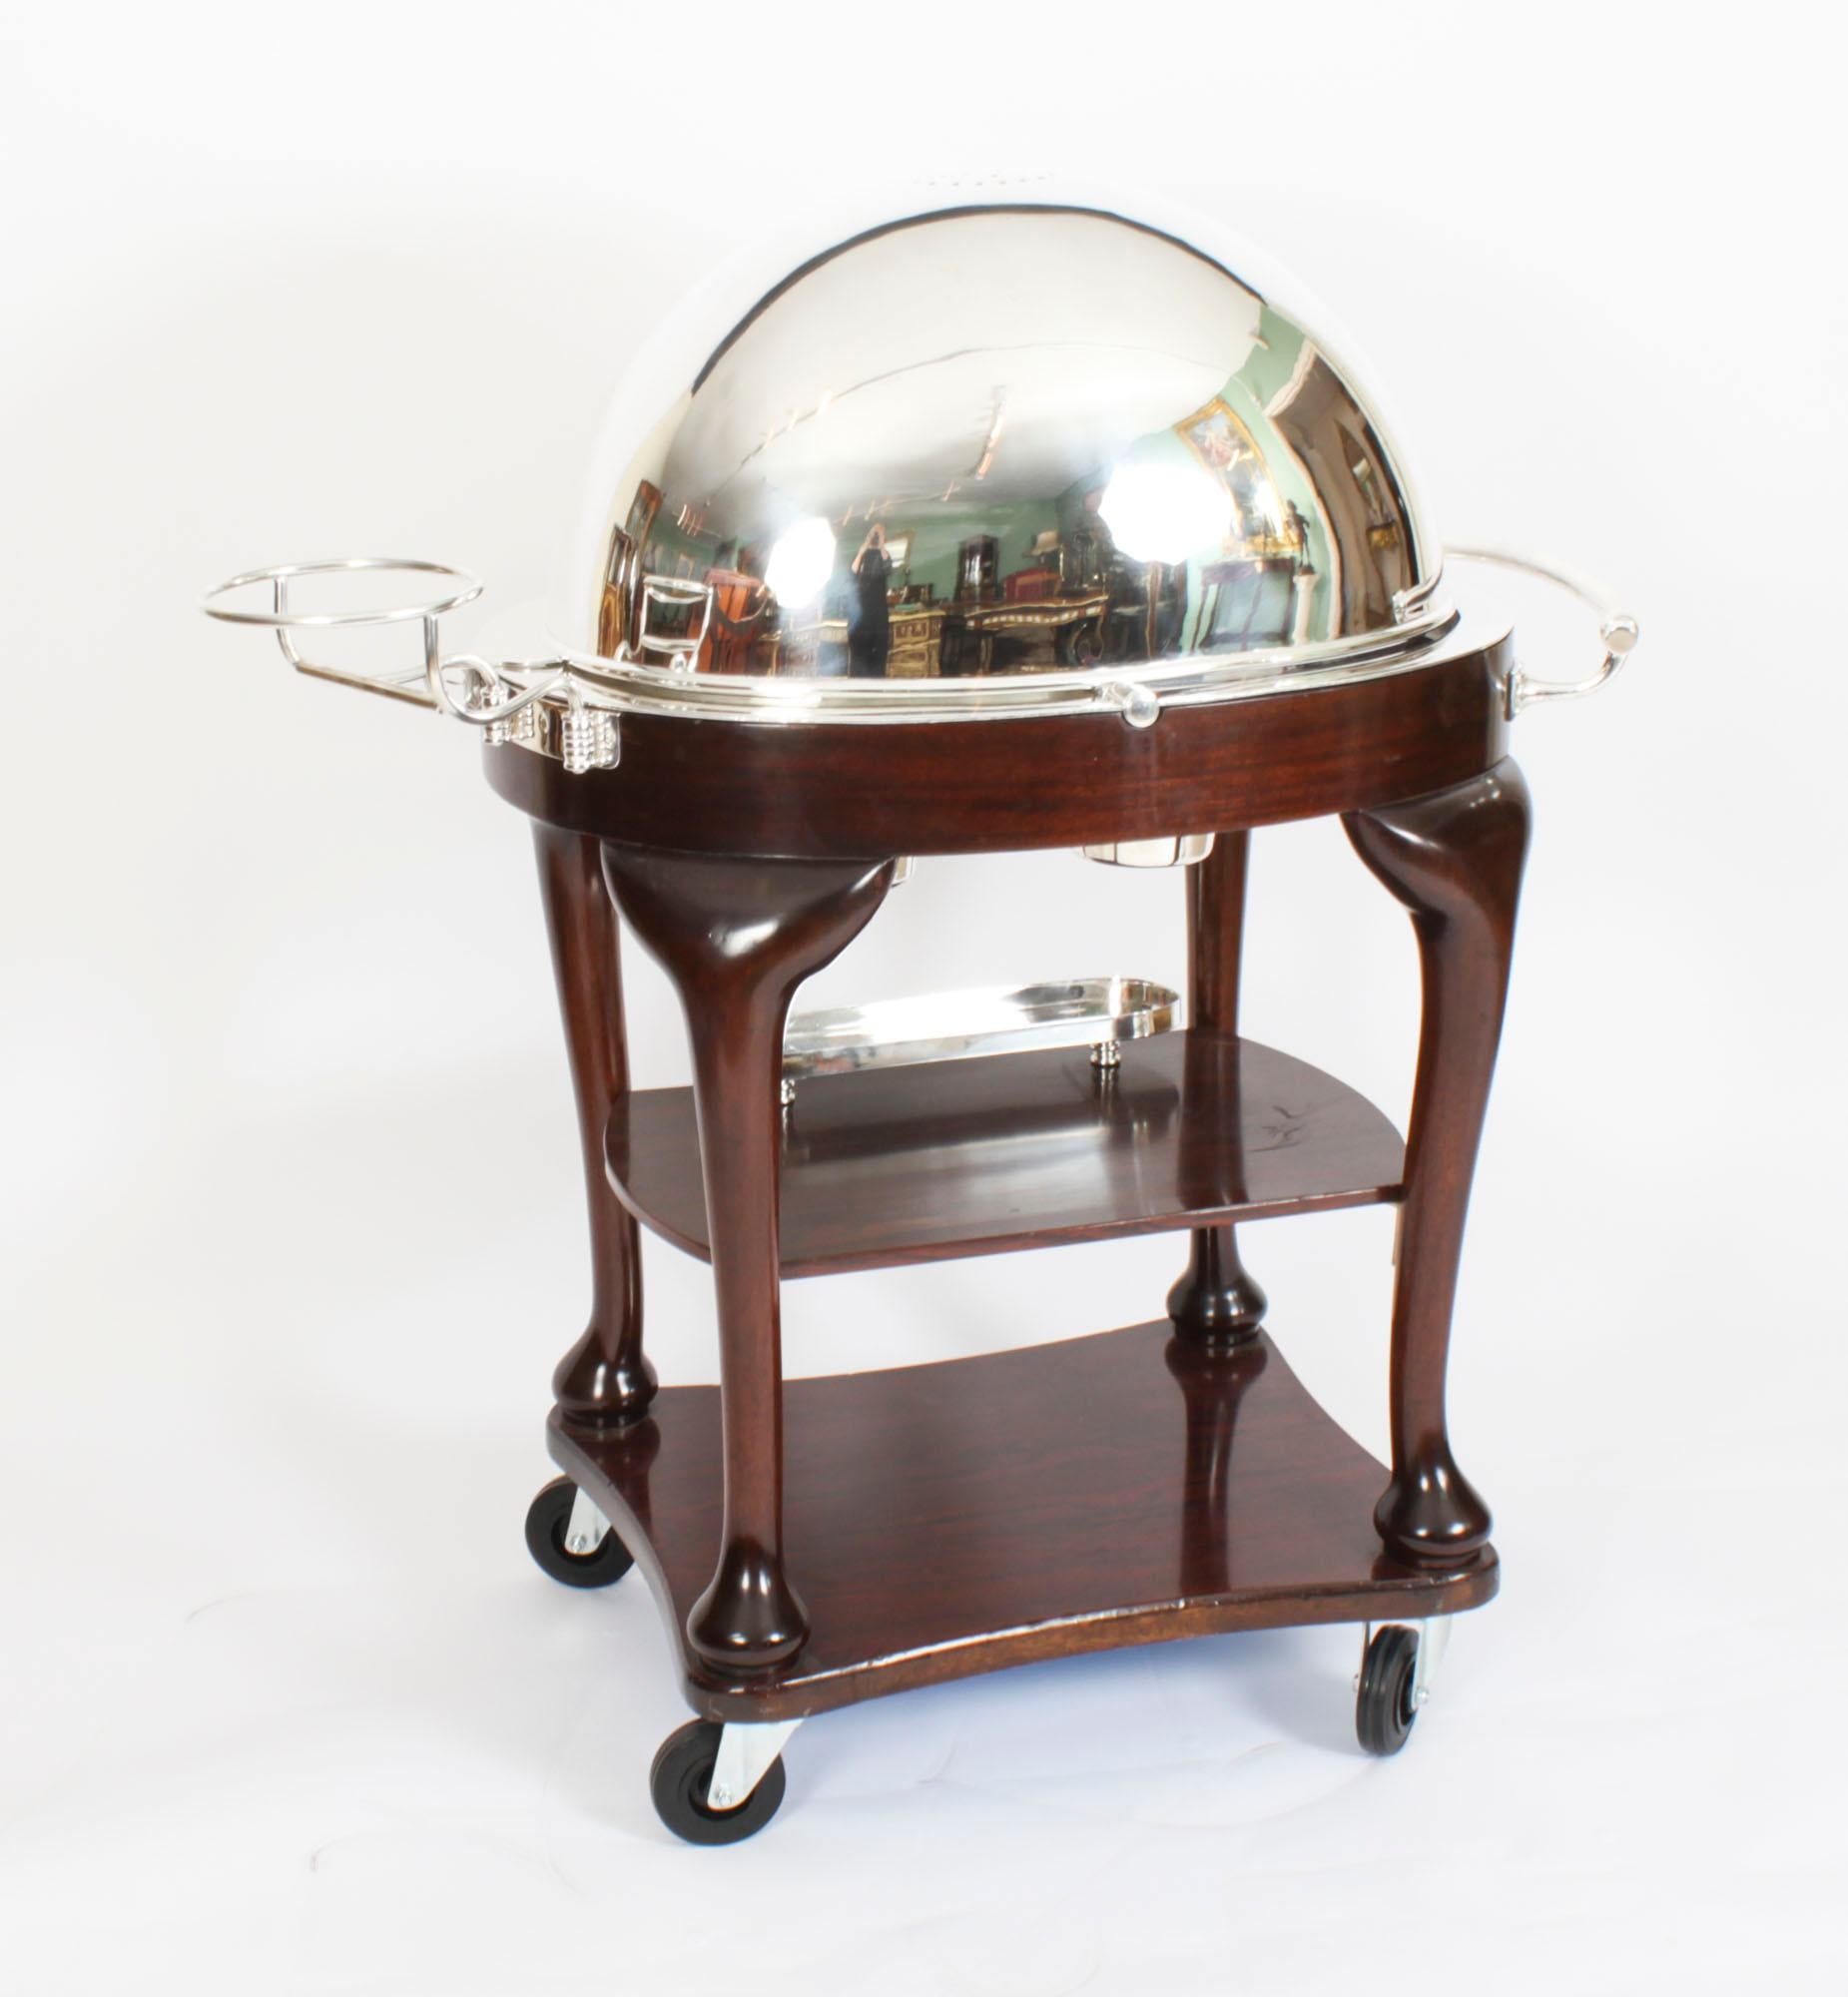 A magnificent and rare fully restored antique Art Deco silver plate  serving cart, circa 1930 in date. 

Serve your roast beef in style!!

This stunning trolley is suitable for serving cooked meats such as roast beef, lamb, and turkey.

It features